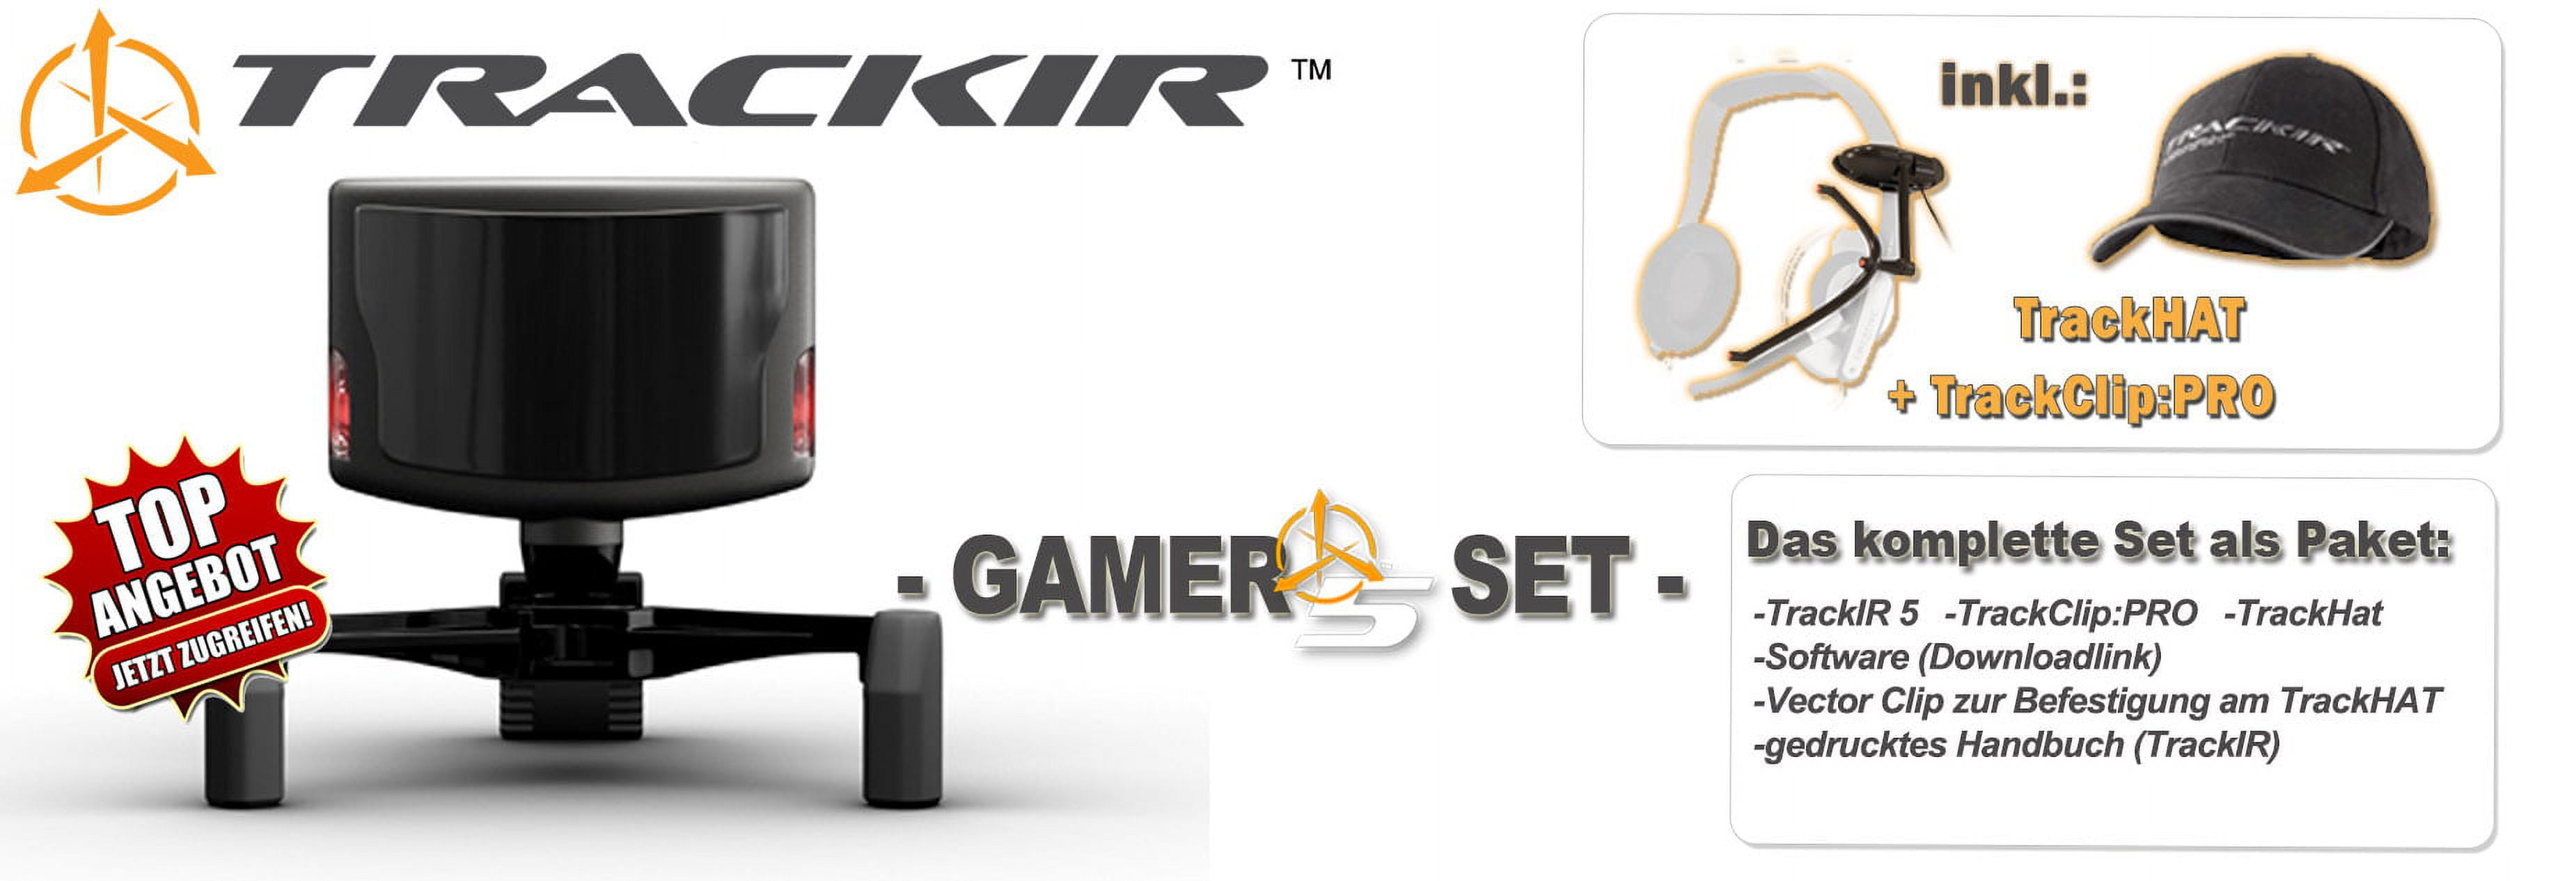 TrackIR Head Tracking System for PC Gaming with IR High Resolution  Trackclip Pro + Cap Bundle 